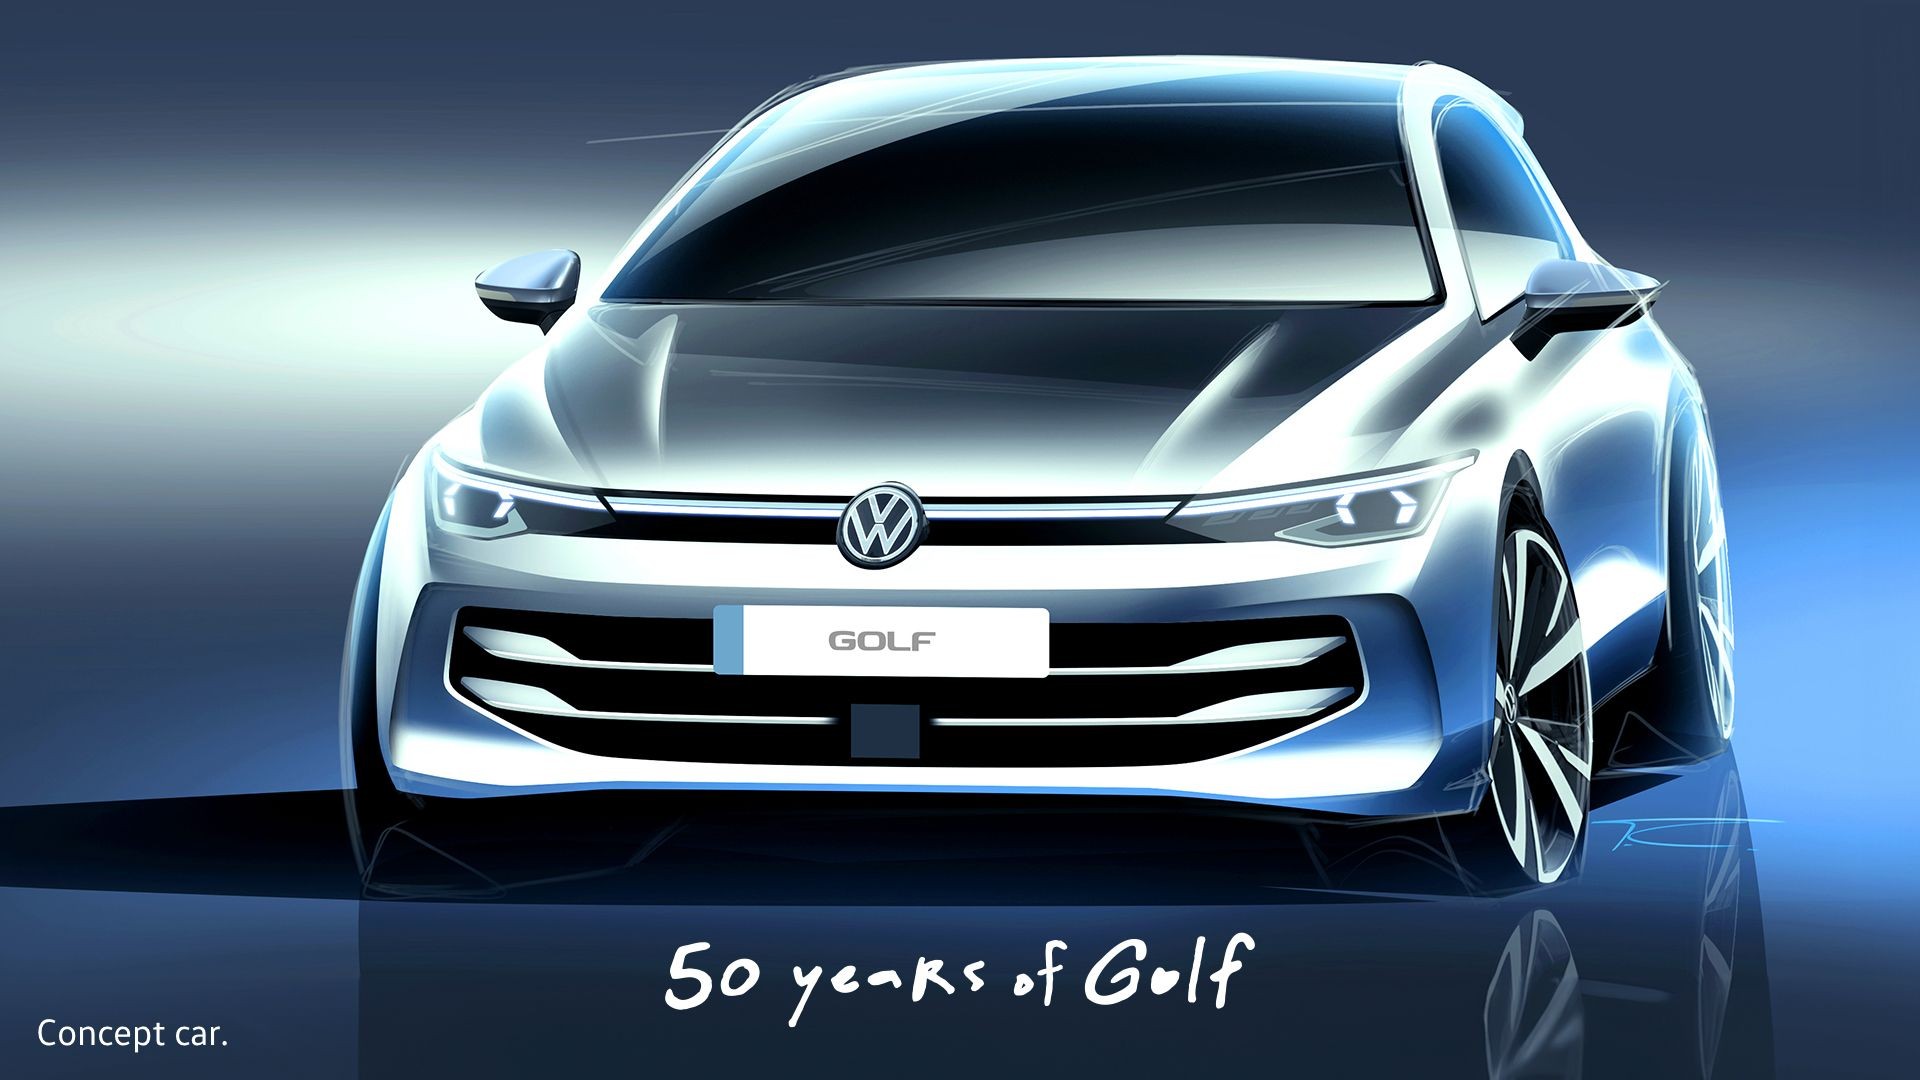 Volkswagen Golf, some drawings “anticipate” the redesign